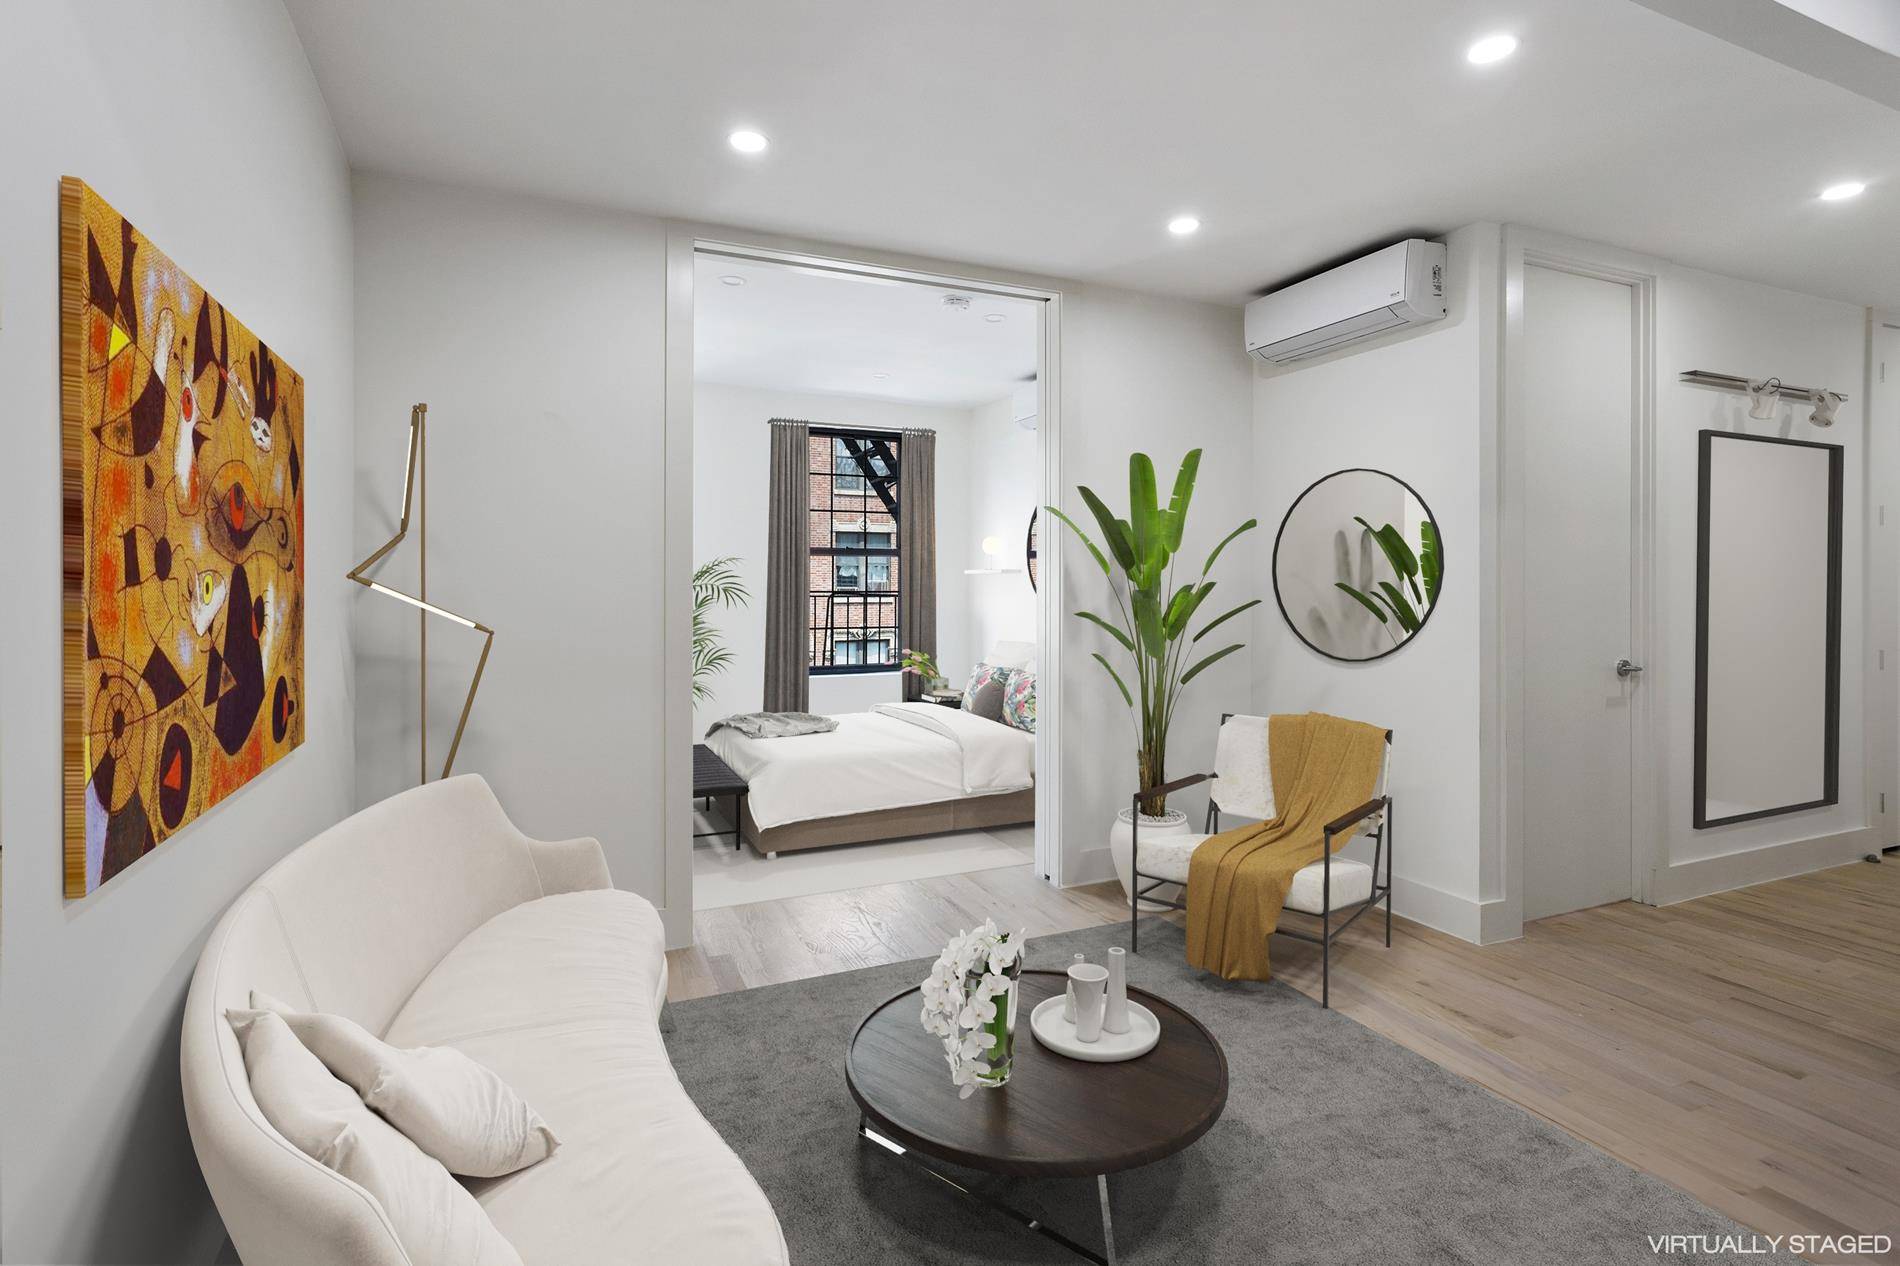 Welcome home to 122 E 102nd Street, a discreet and intimate new condominium centrally located where the Upper East Side meets East Harlem.